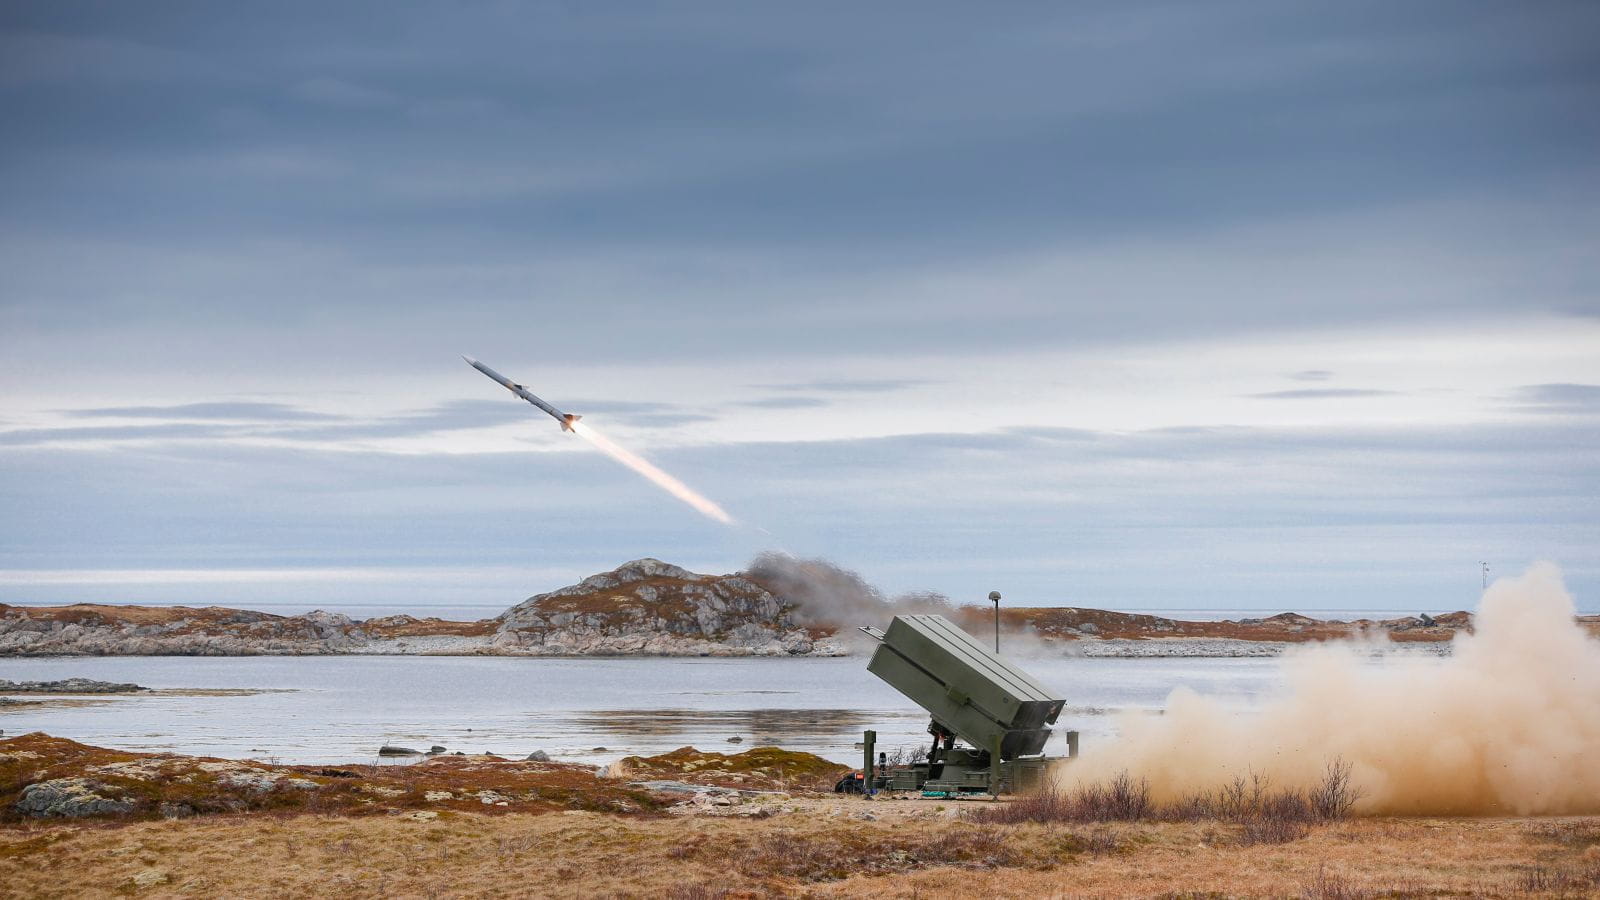 A surface to air missile firing next to a body of water